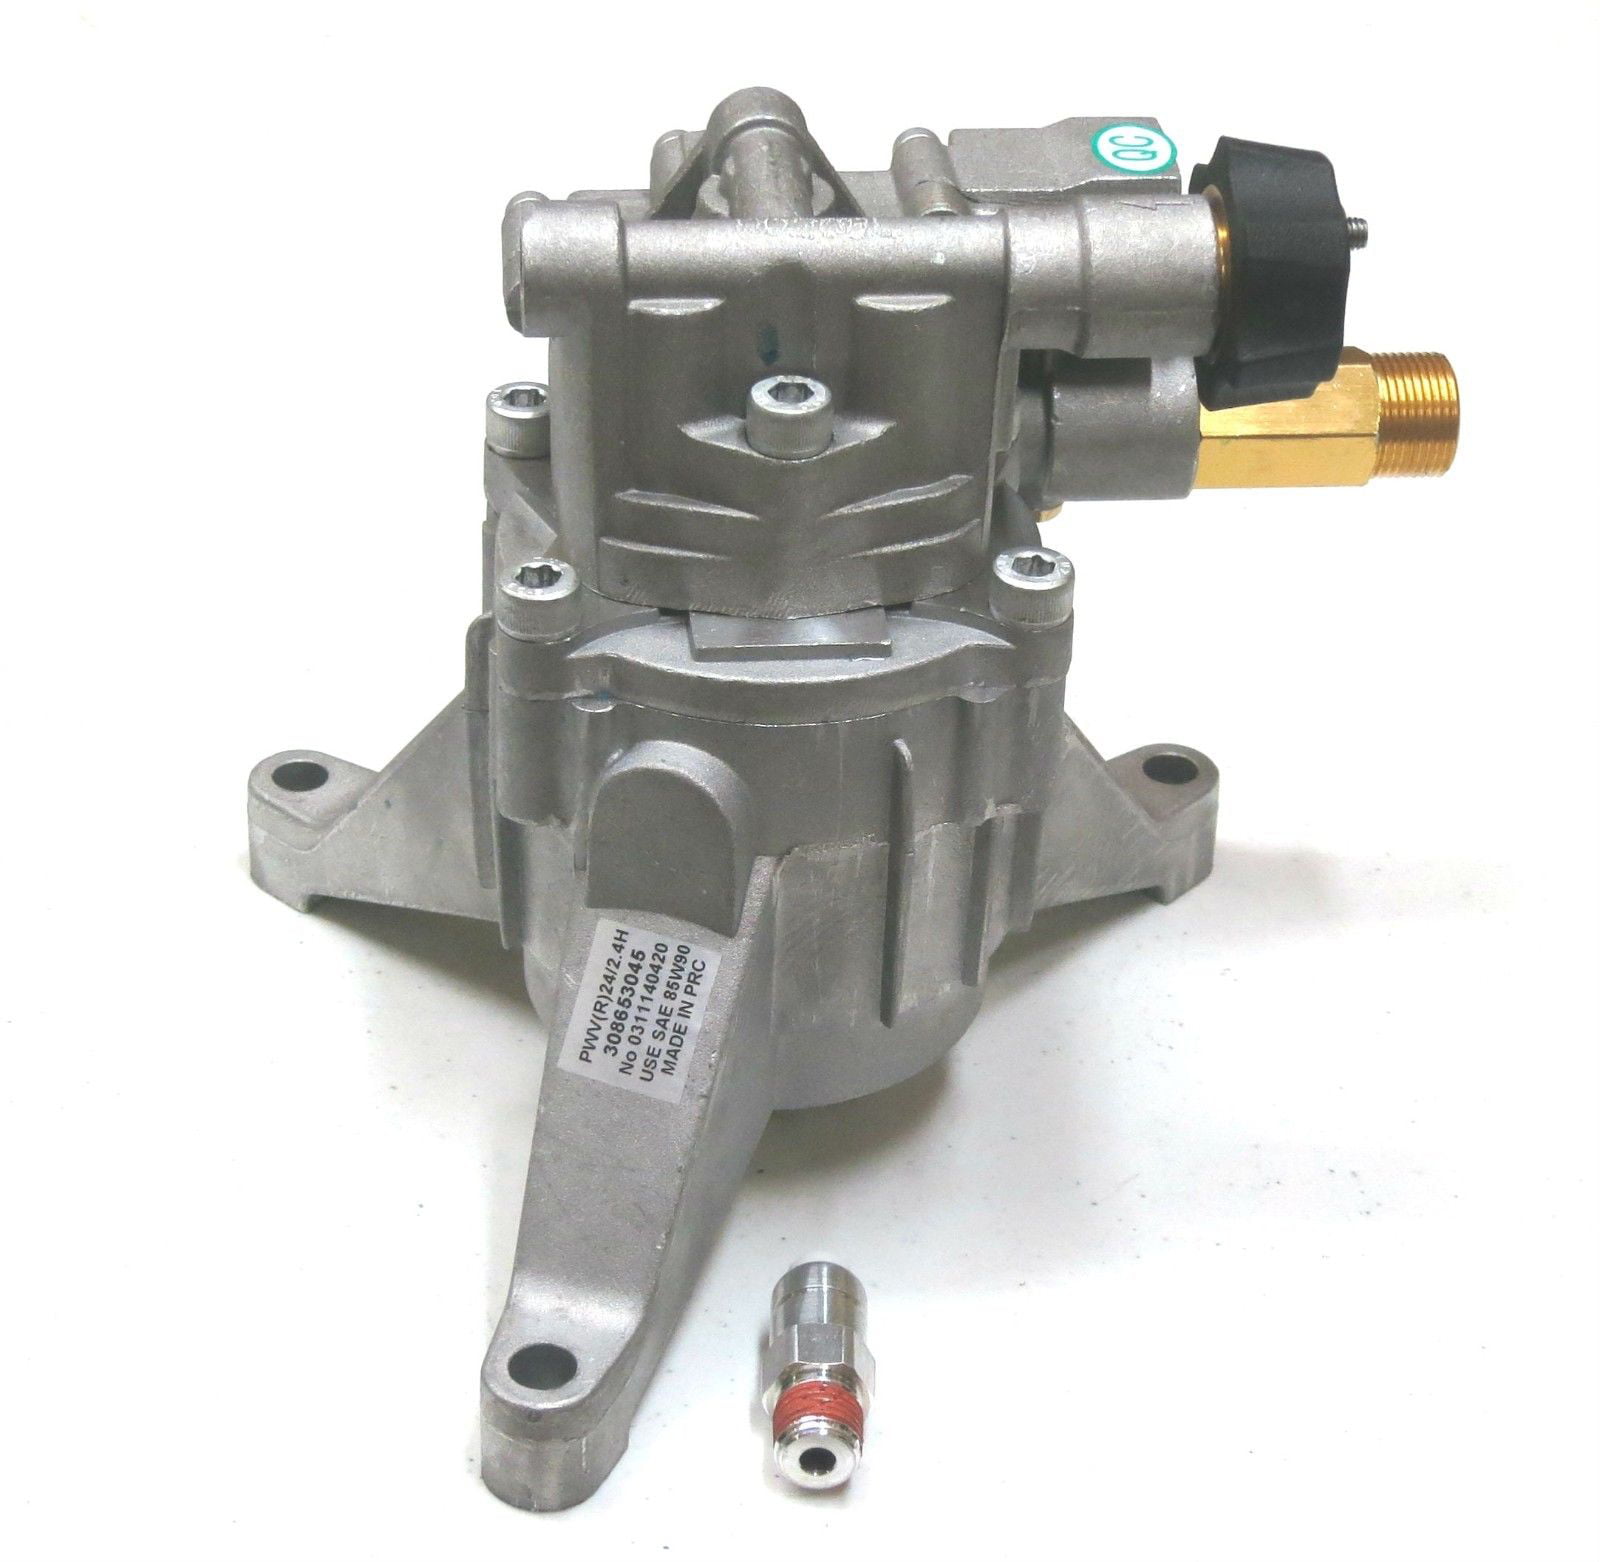 2800 psi POWER PRESSURE WASHER WATER PUMP Excell Devilbiss XLVR2522  A07908 